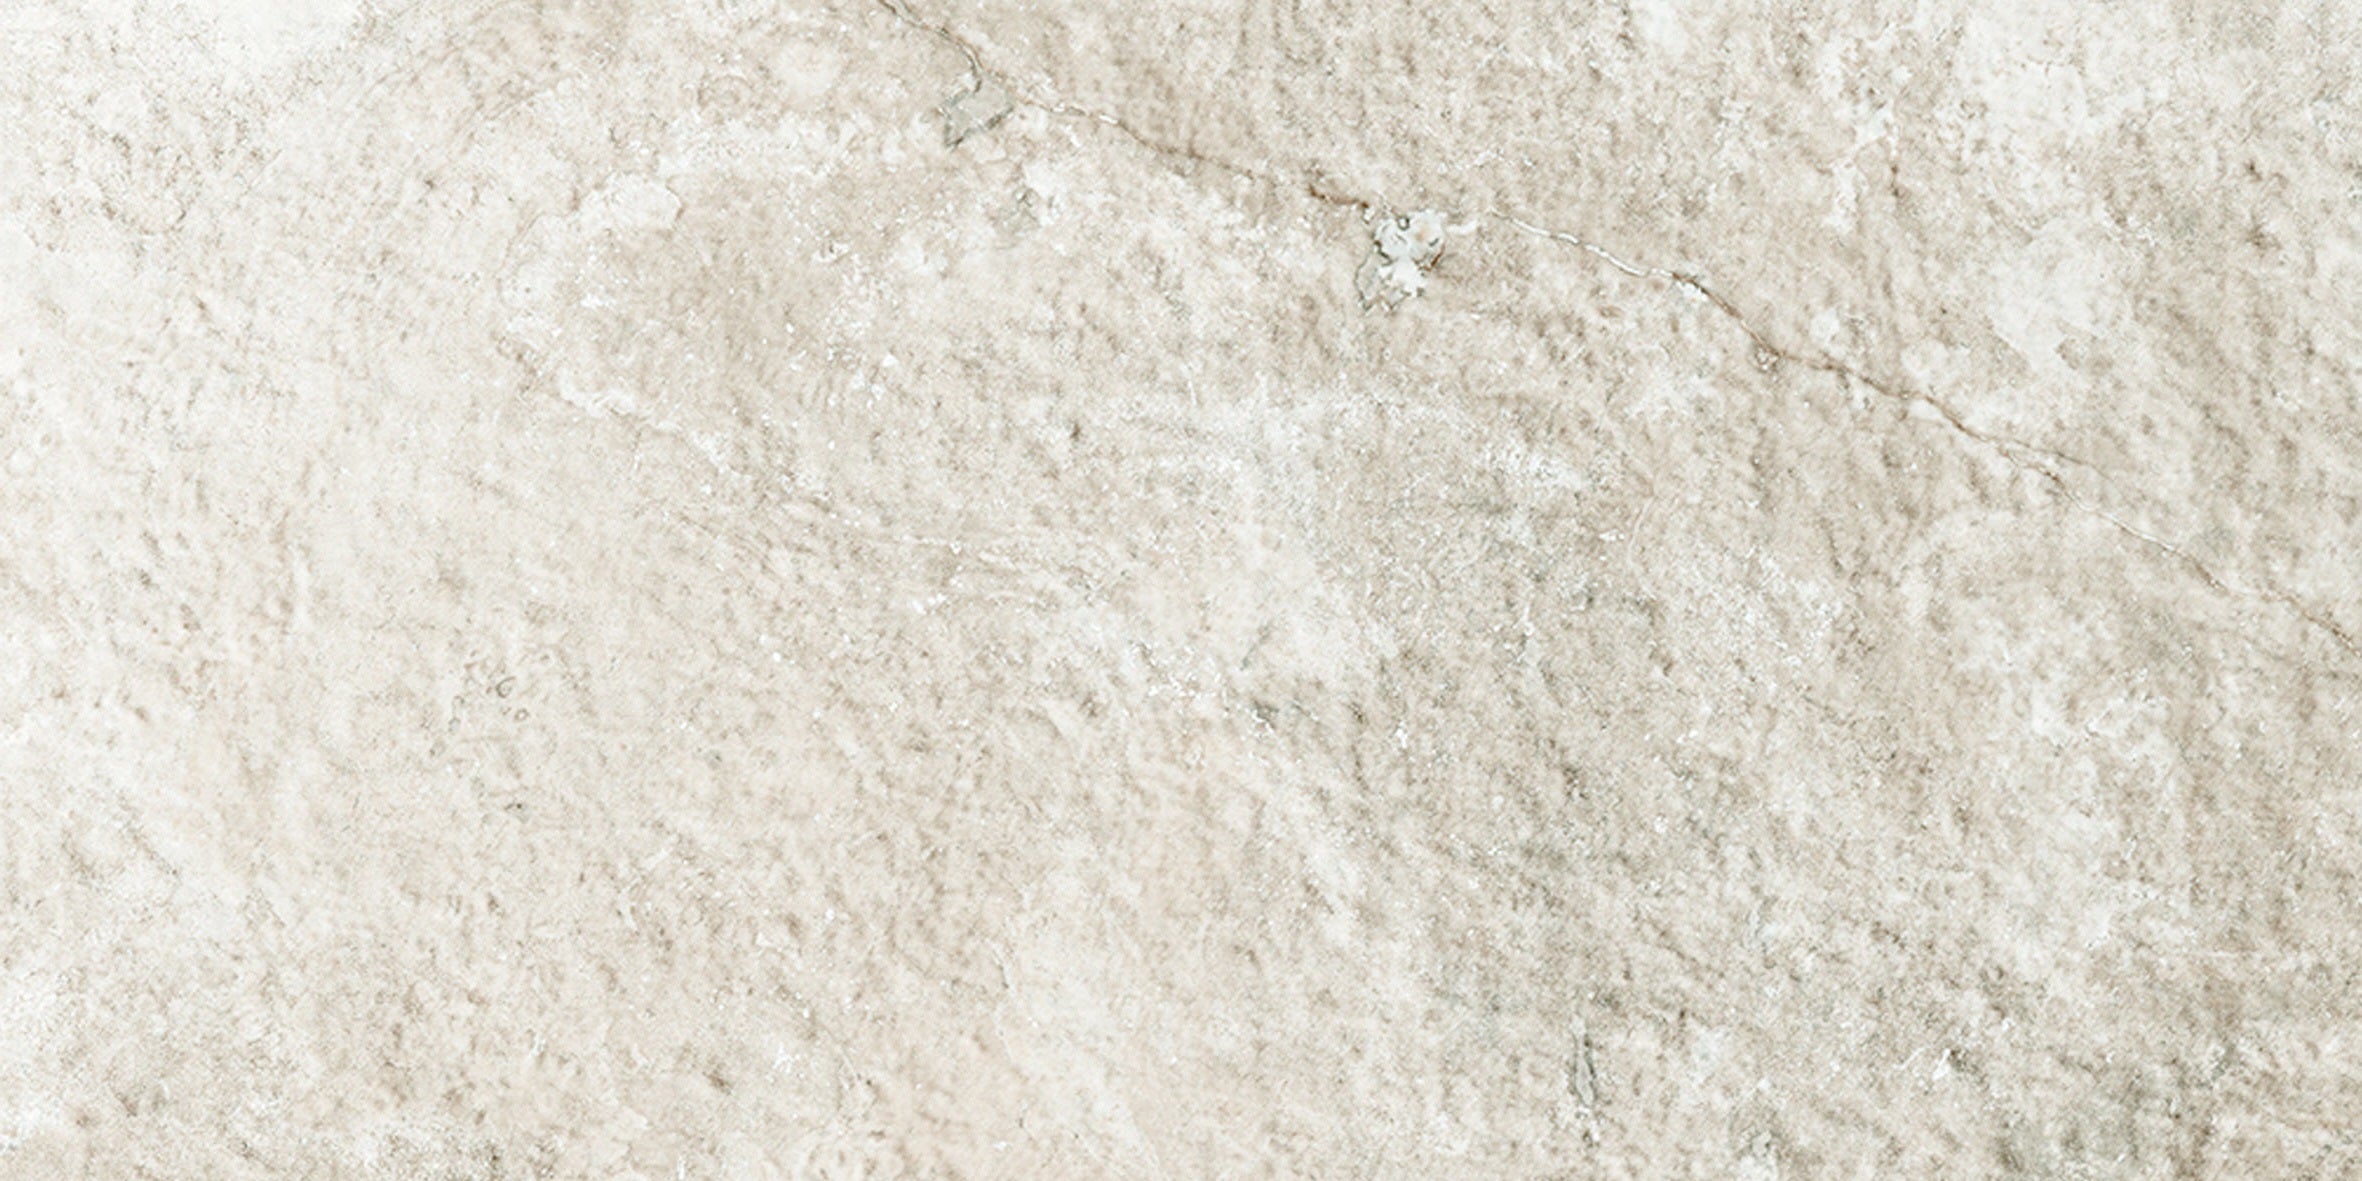 landmark frontier20 travertine cross cut white paver tile 24x48x20mm matte rectified porcelain tile distributed by surface group international